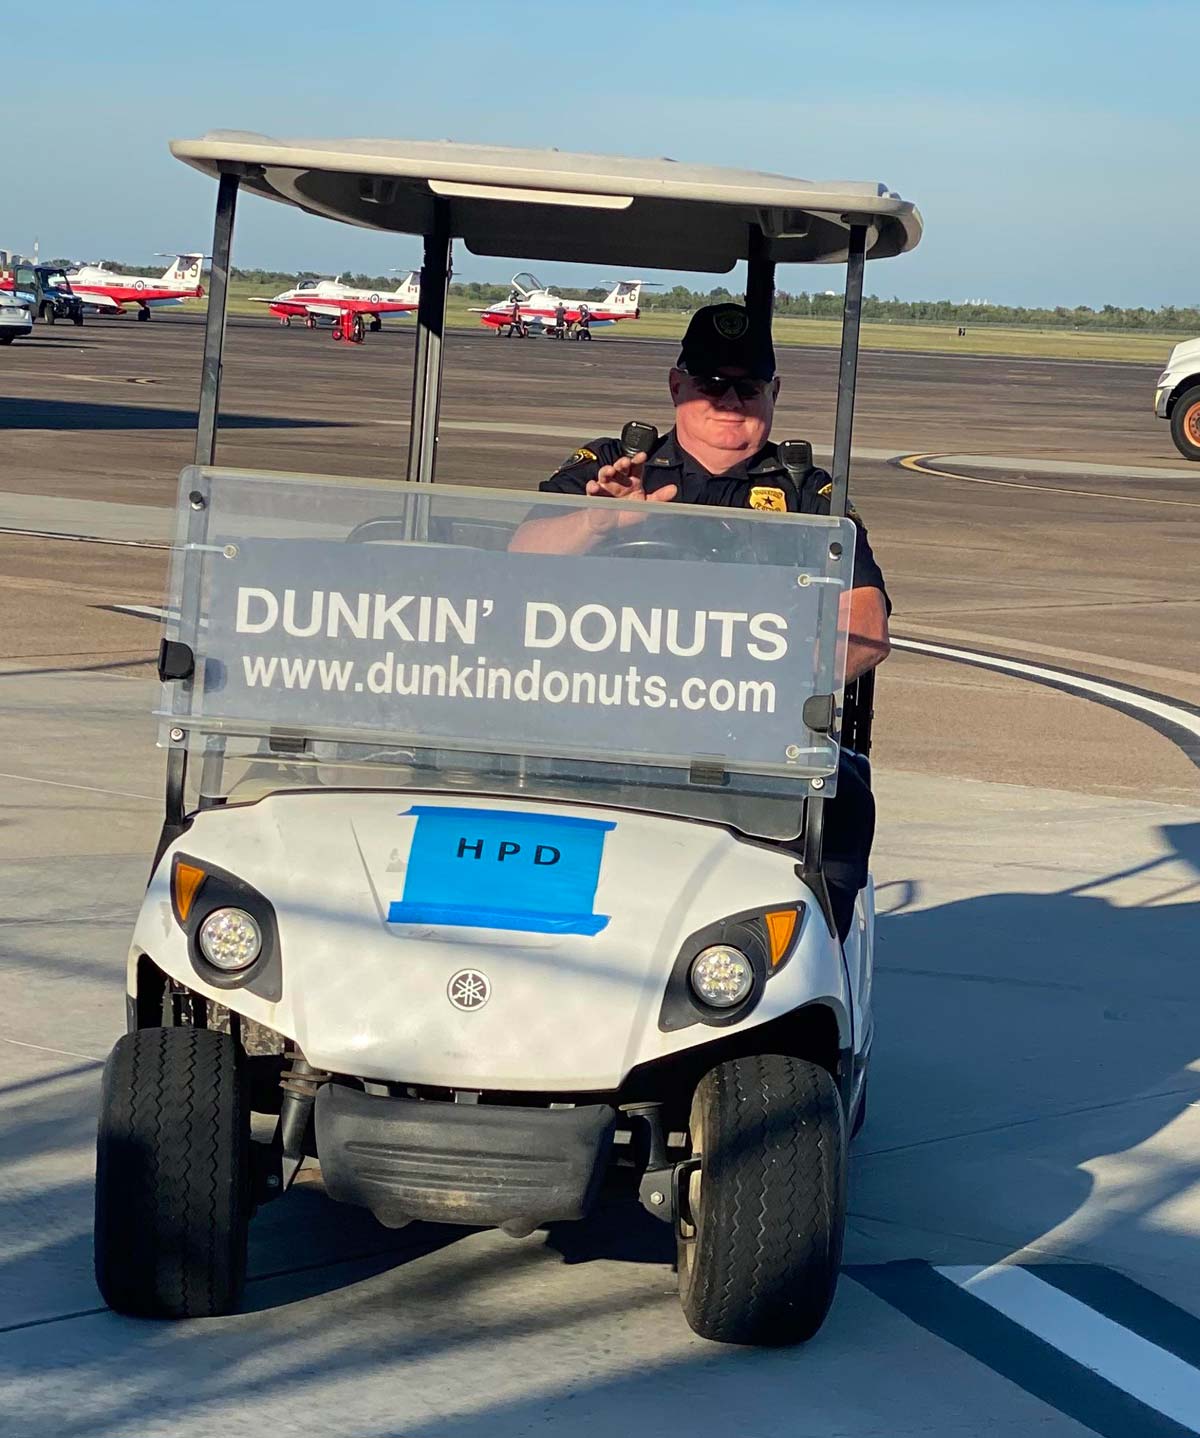 Houston Police officer in cart sponsored by Dunkin' Dounuts. Seen at Wings Over Houston airshow